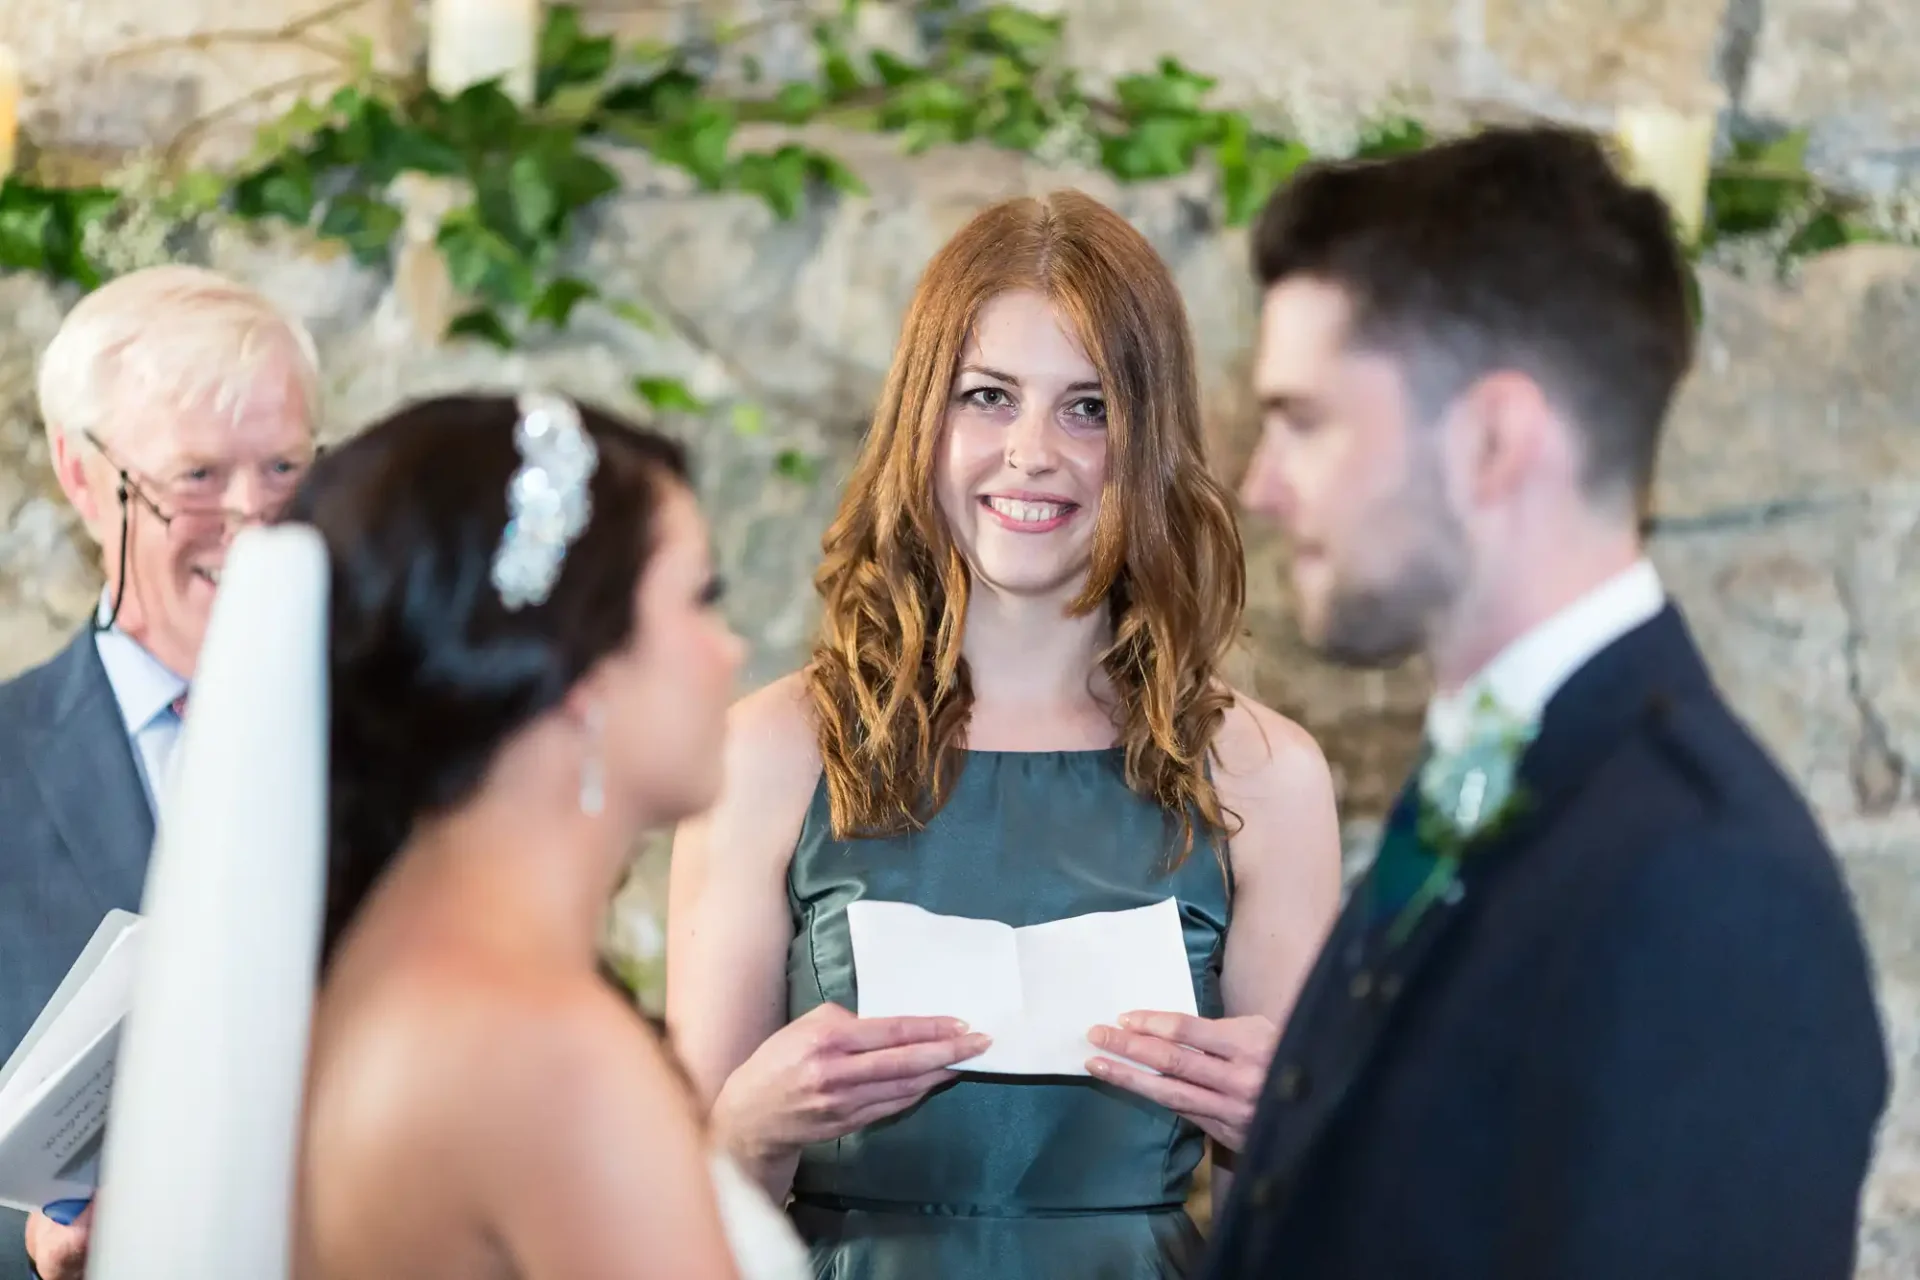 A woman in a green dress gives a speech at a wedding, with the bride and groom listening attentively in the foreground.